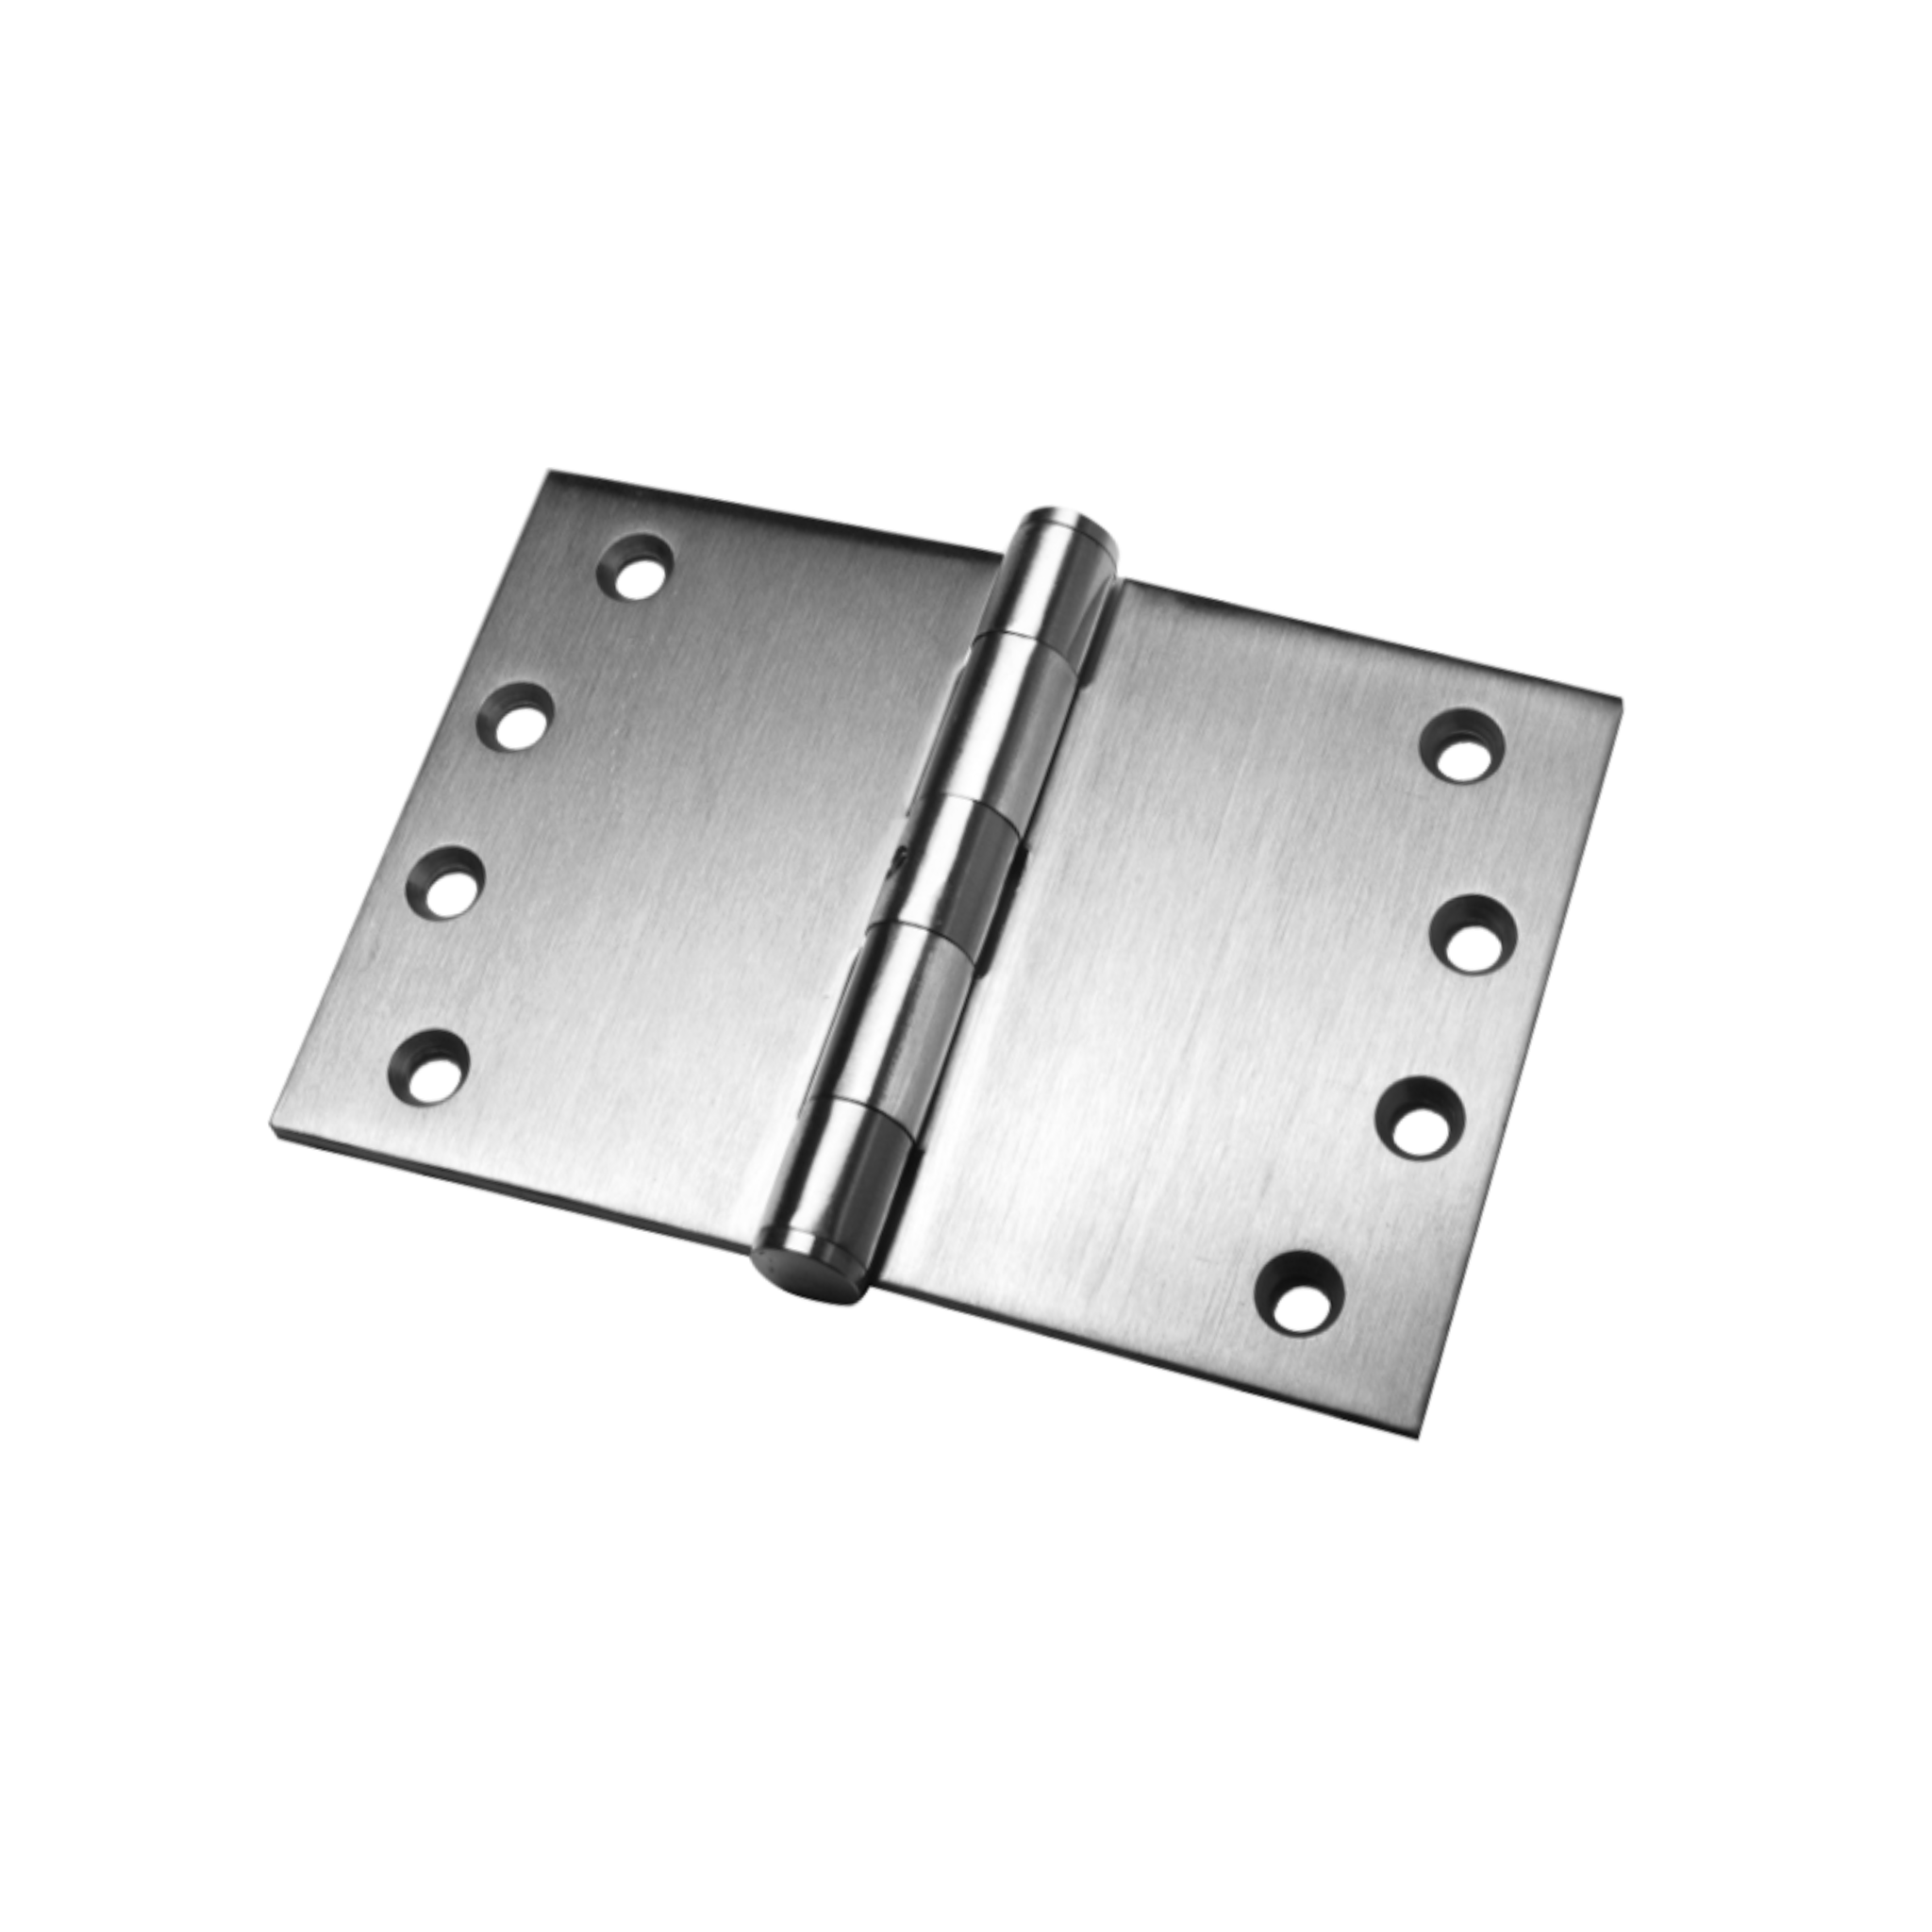 QS4412/4 230, Projection Hinge, 2 x Hinges (1 Pair), 100mm (h) x 230mm (w) x 3.5mm (t), Stainless Steel, QS